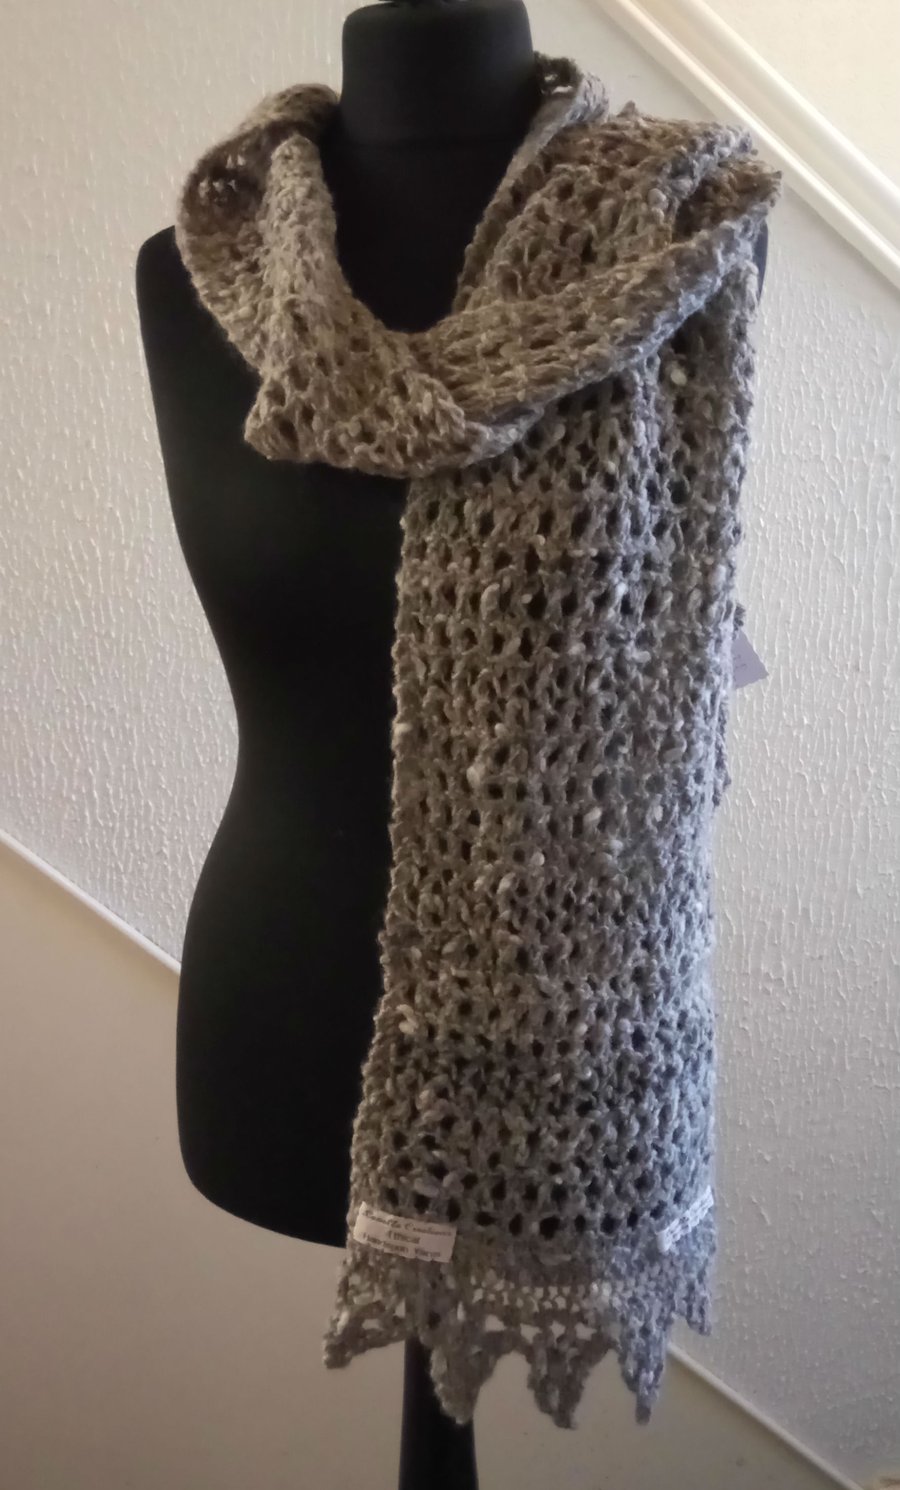 Handspun and Hand-knitted Trellis Pattern Scarf in Soay Wool